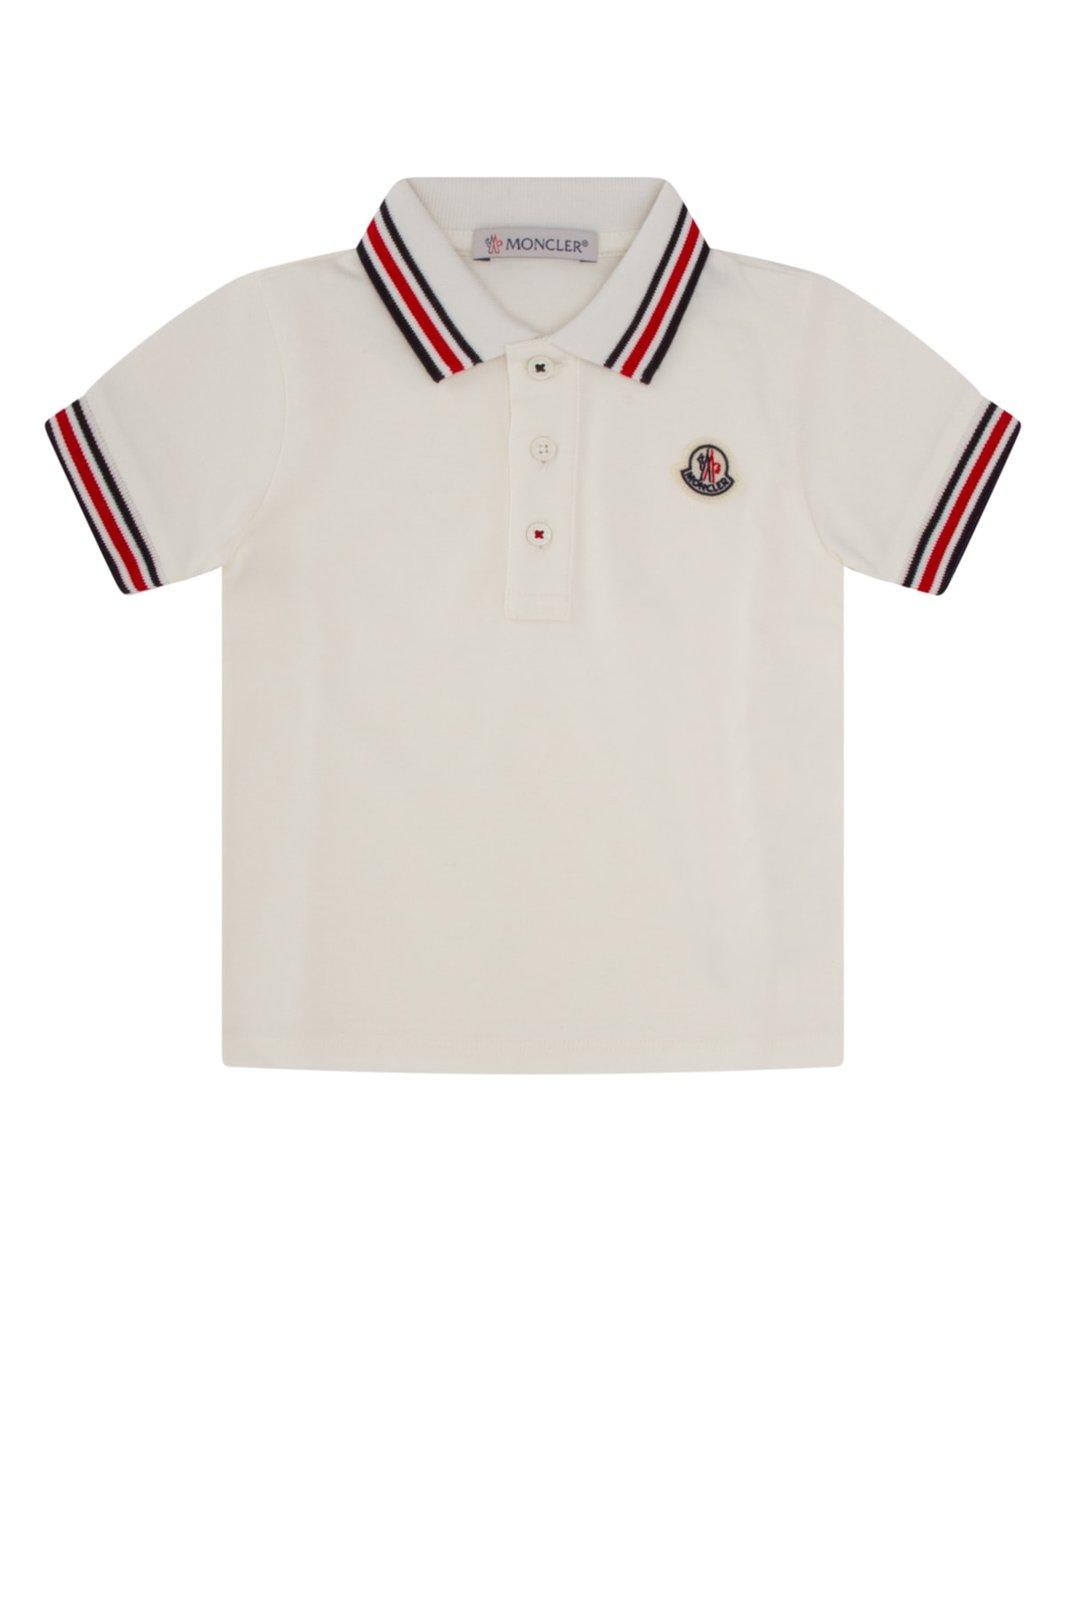 MONCLER LOGO PATCH SHORT SLEEVED POLO SHIRT